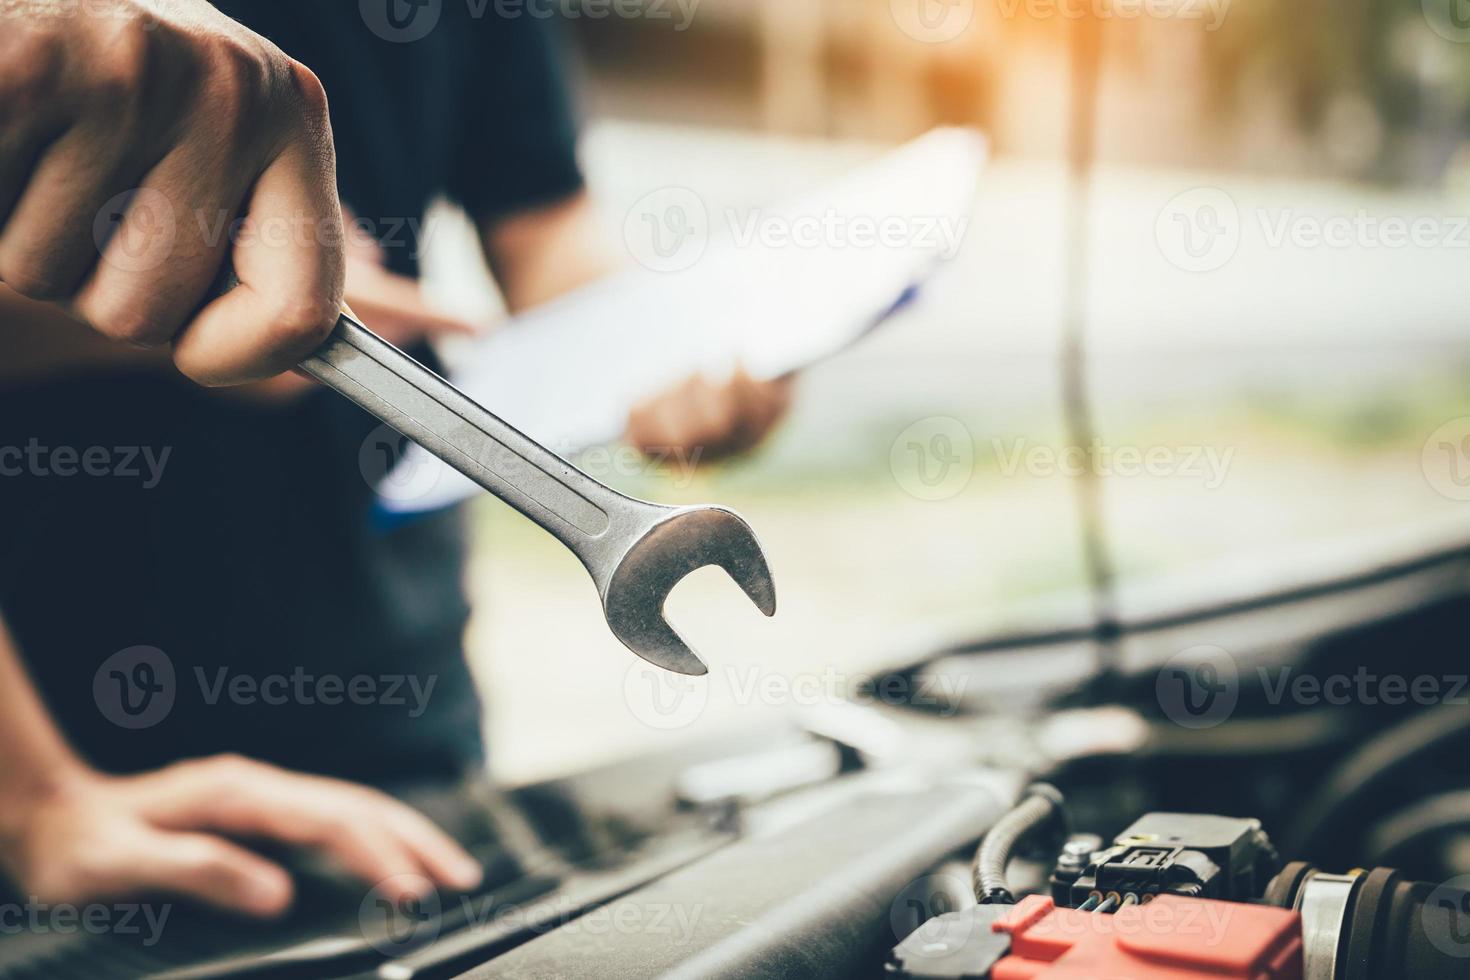 Car mechanic is holding a wrench ready to check the engine and maintenance. photo